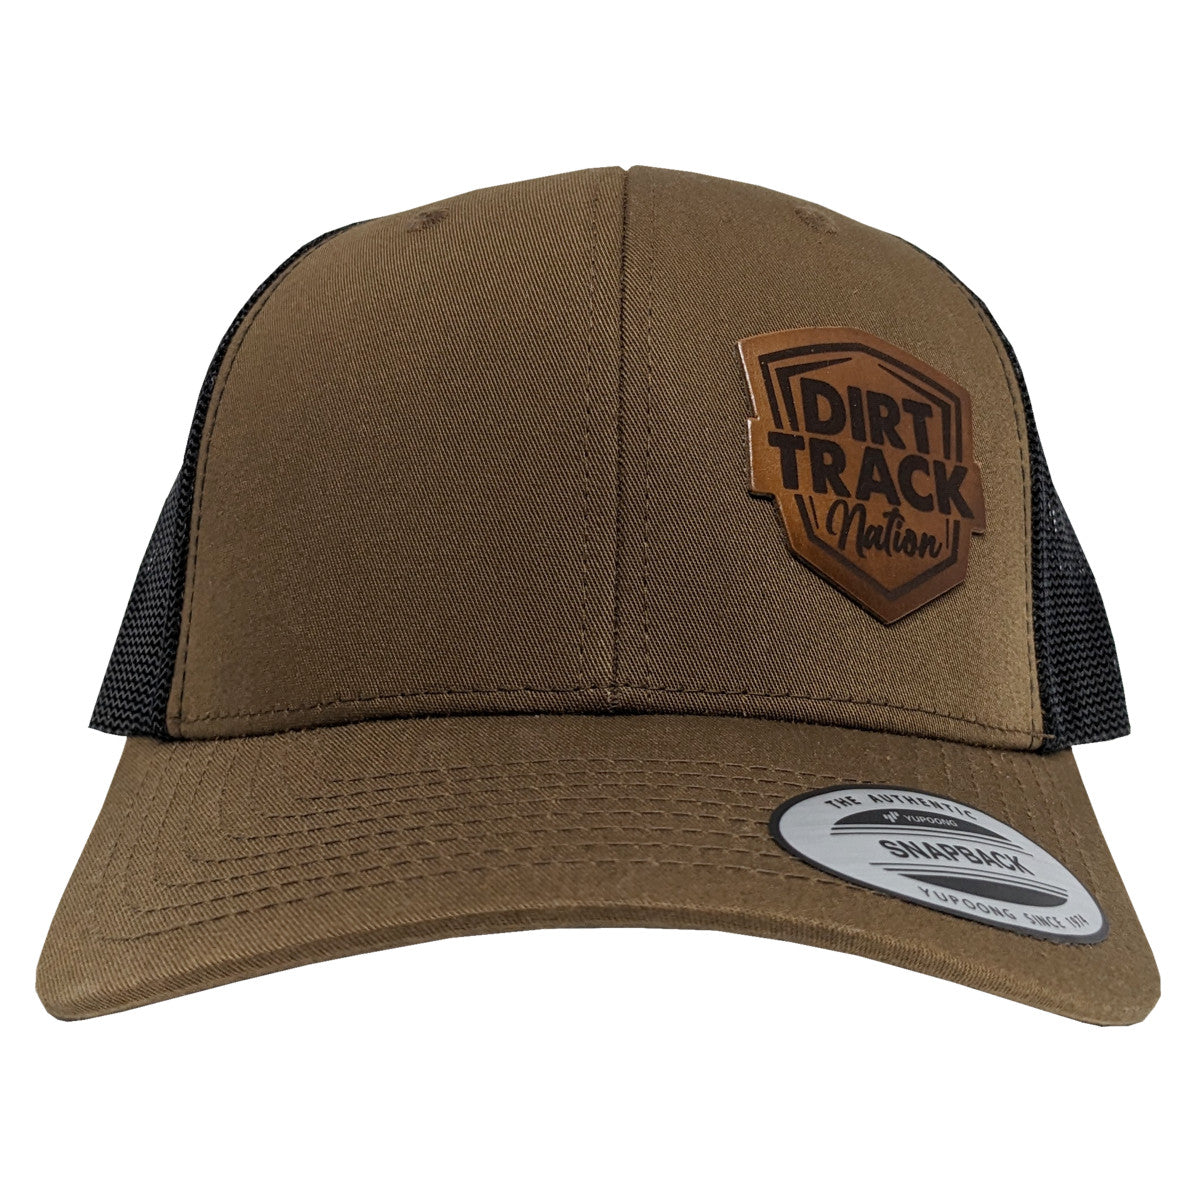 Dirt Track Nation Coyote Brown W/ Black Mesh Hat